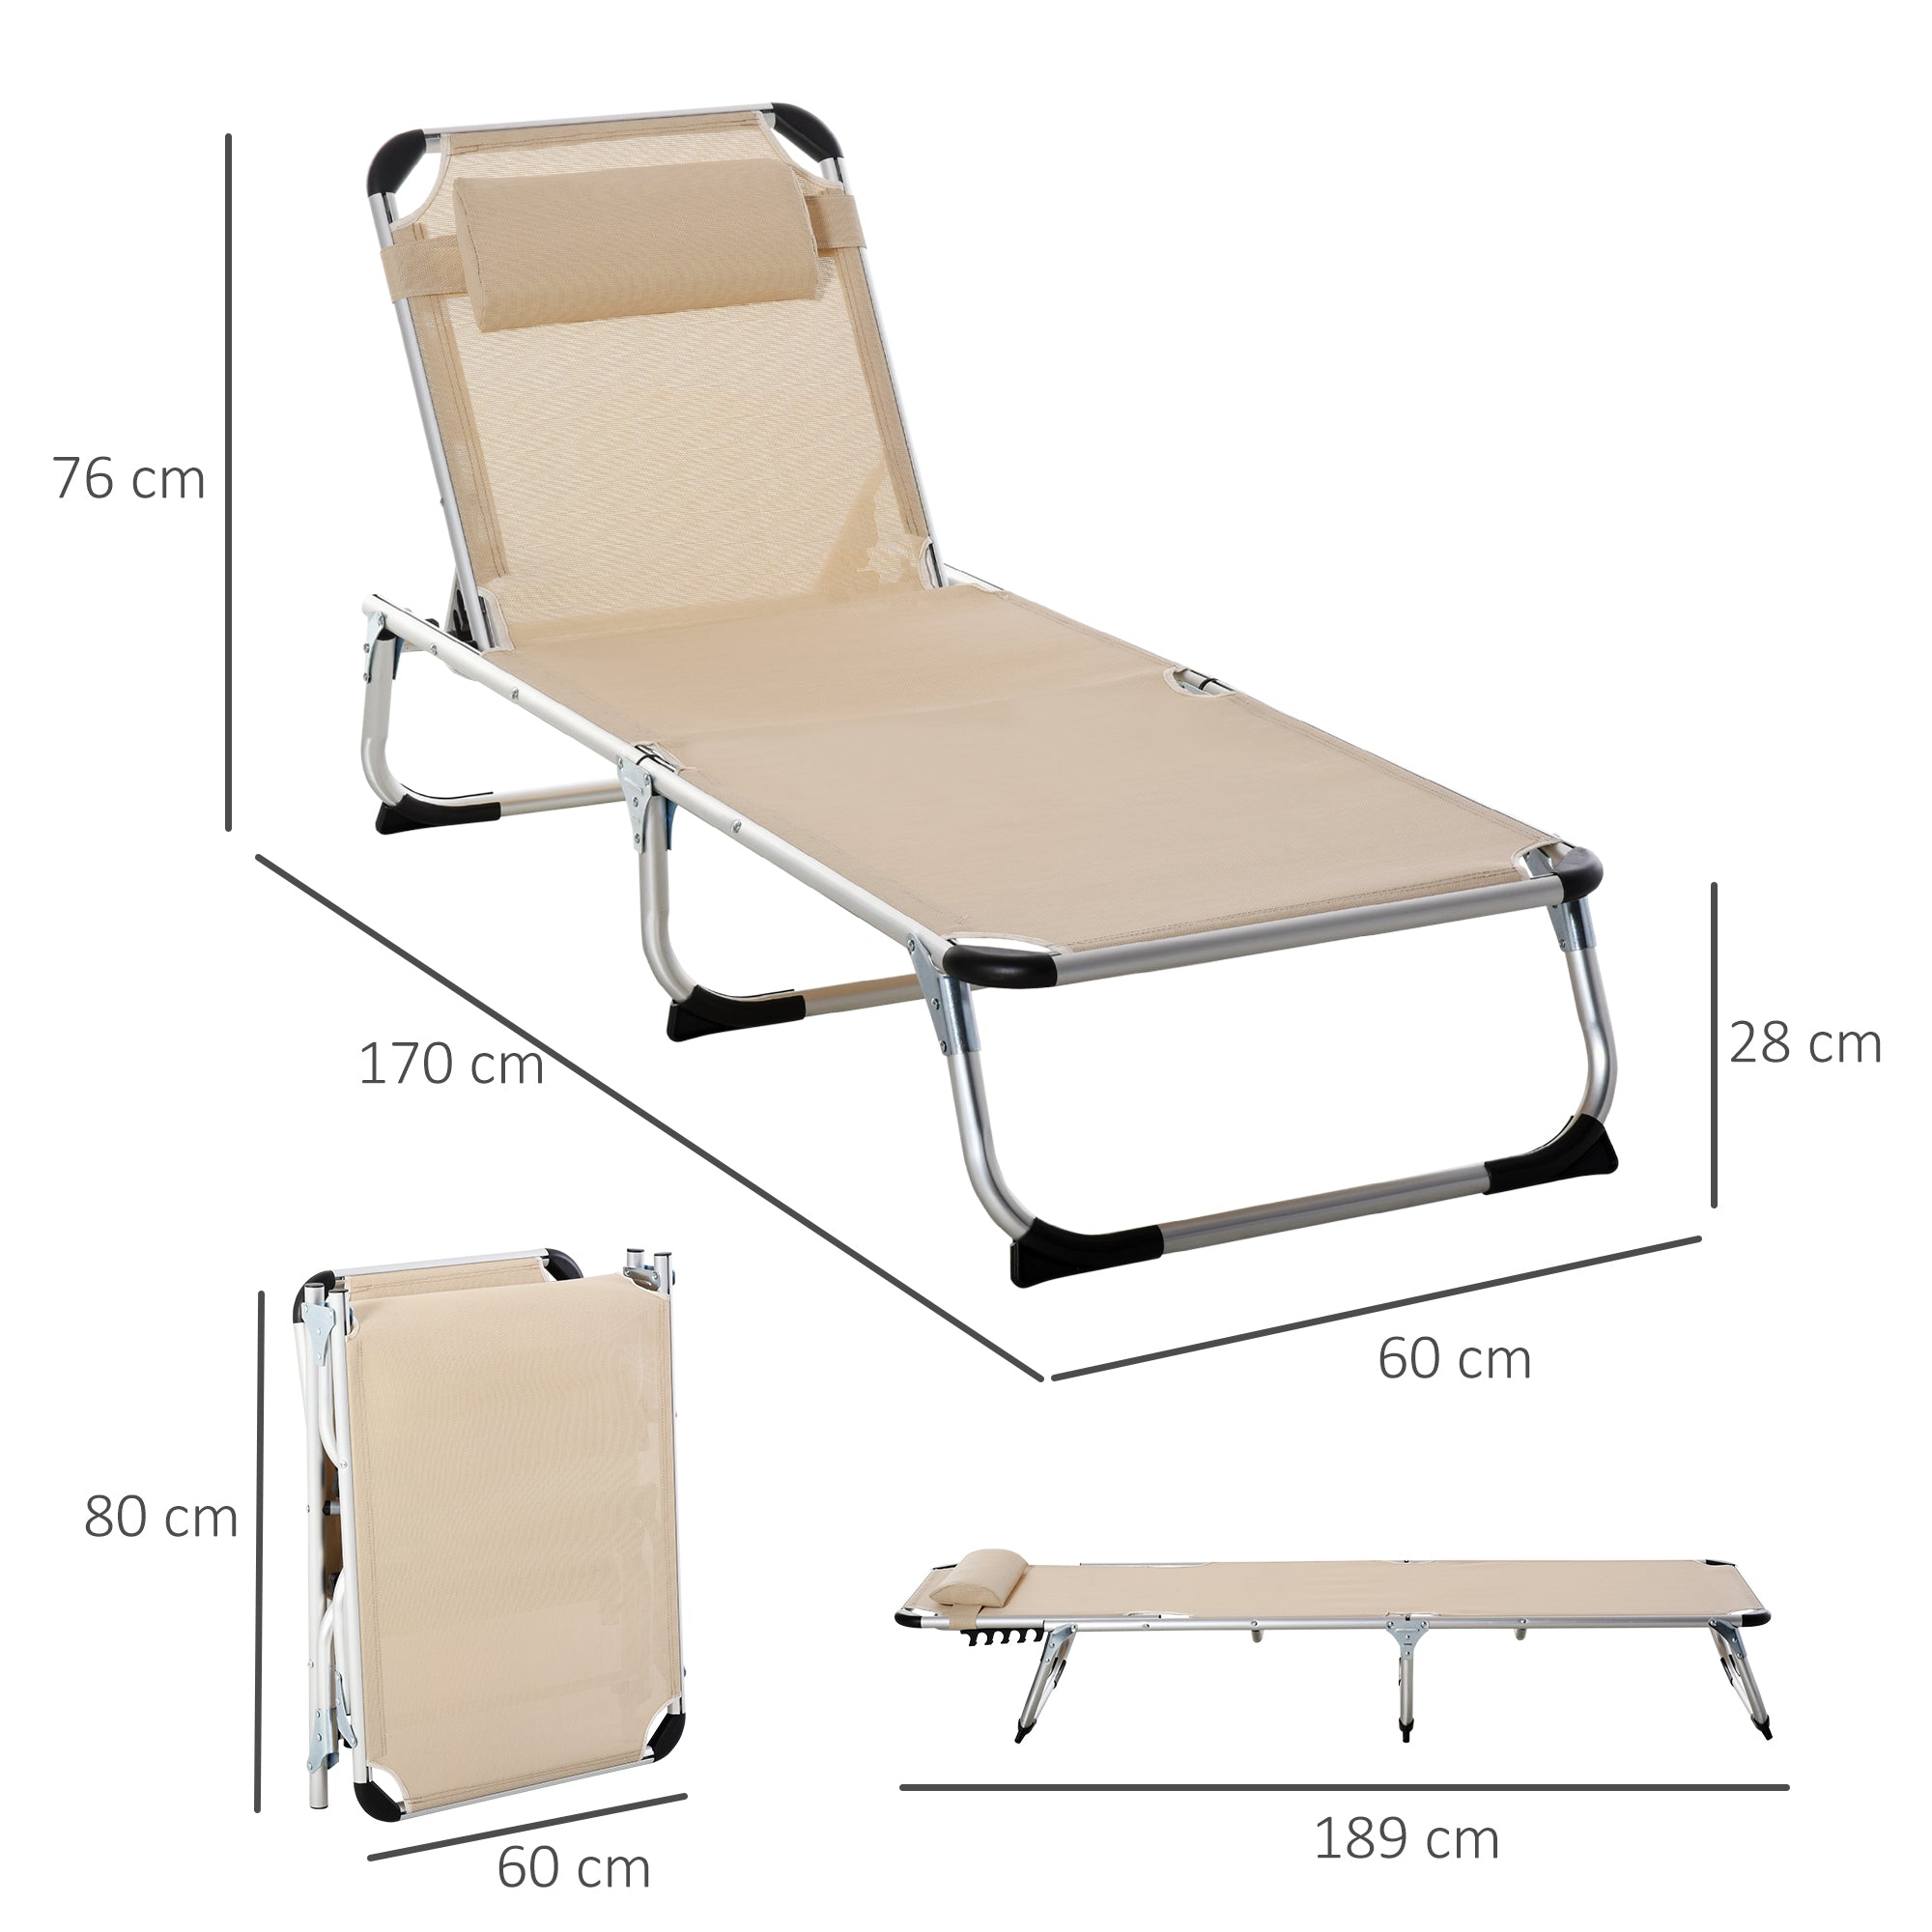 Outsunny Foldable Reclining Sun Lounger Lounge Chair Camping Bed Cot with Pillow 5-Level Adjustable Back Aluminium Frame Khaki - Inspirely